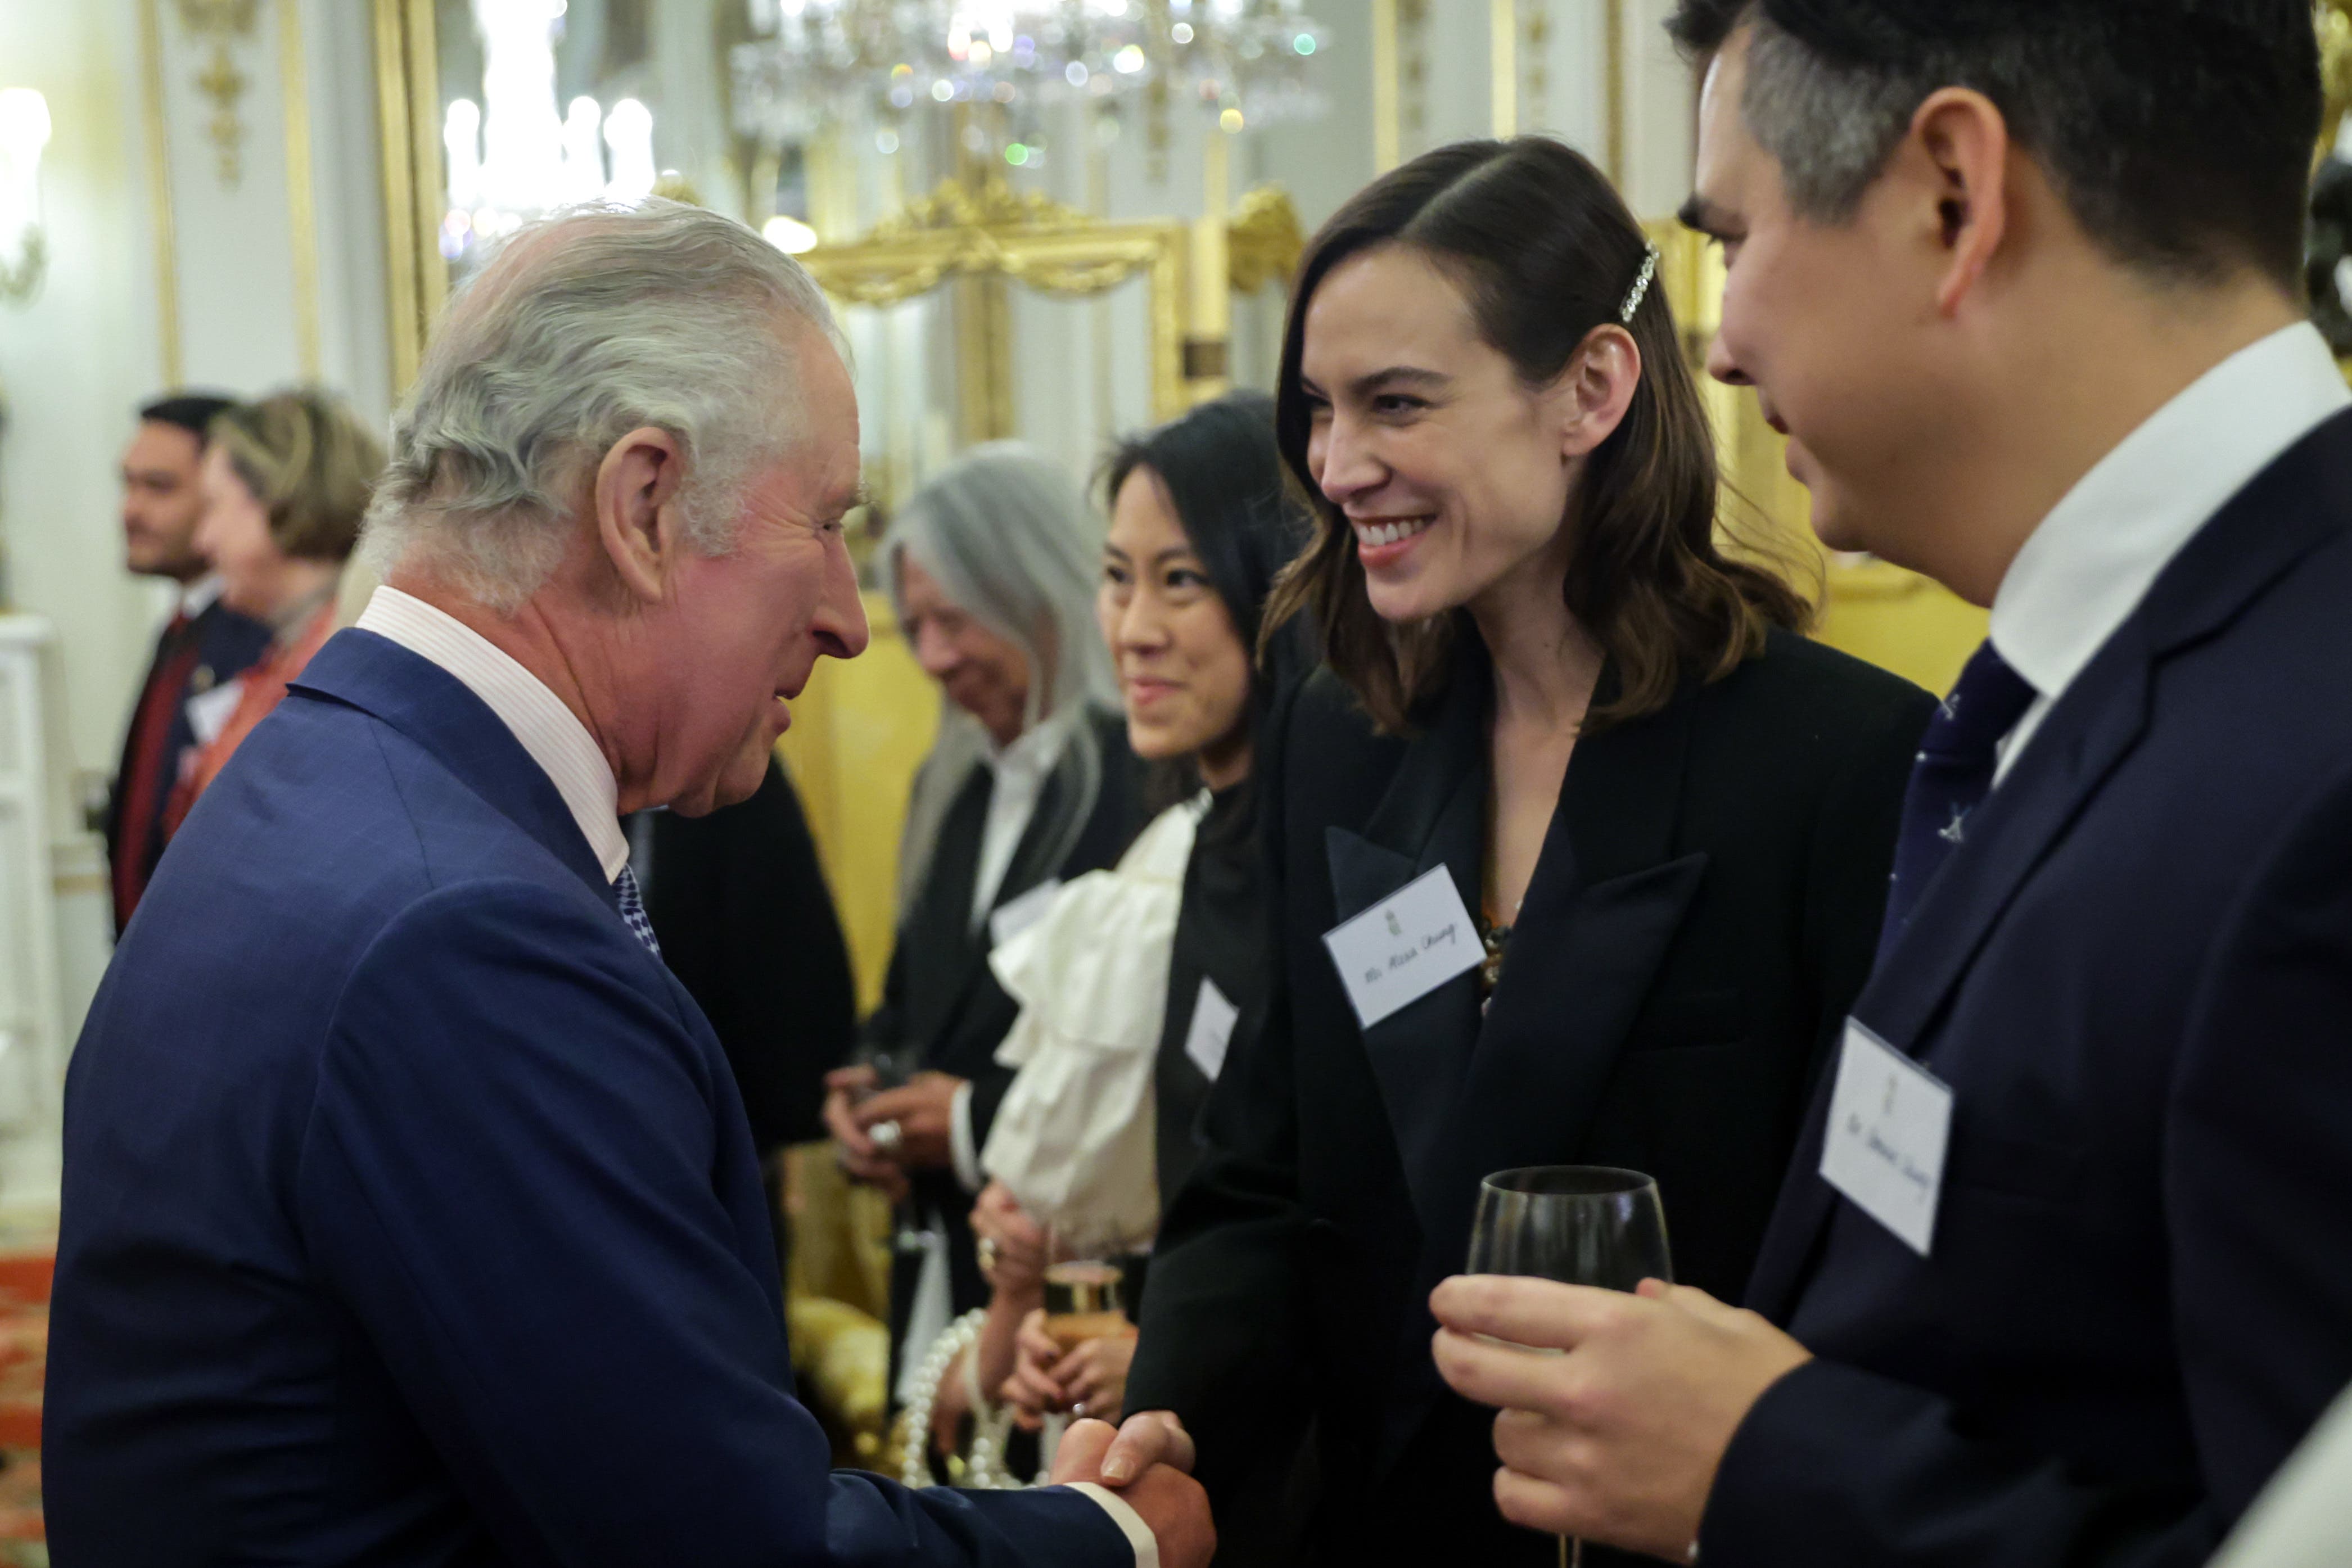 The King spoke with fashion designer Alexa Chung at a reception to celebrate British East and South-East Asian communities